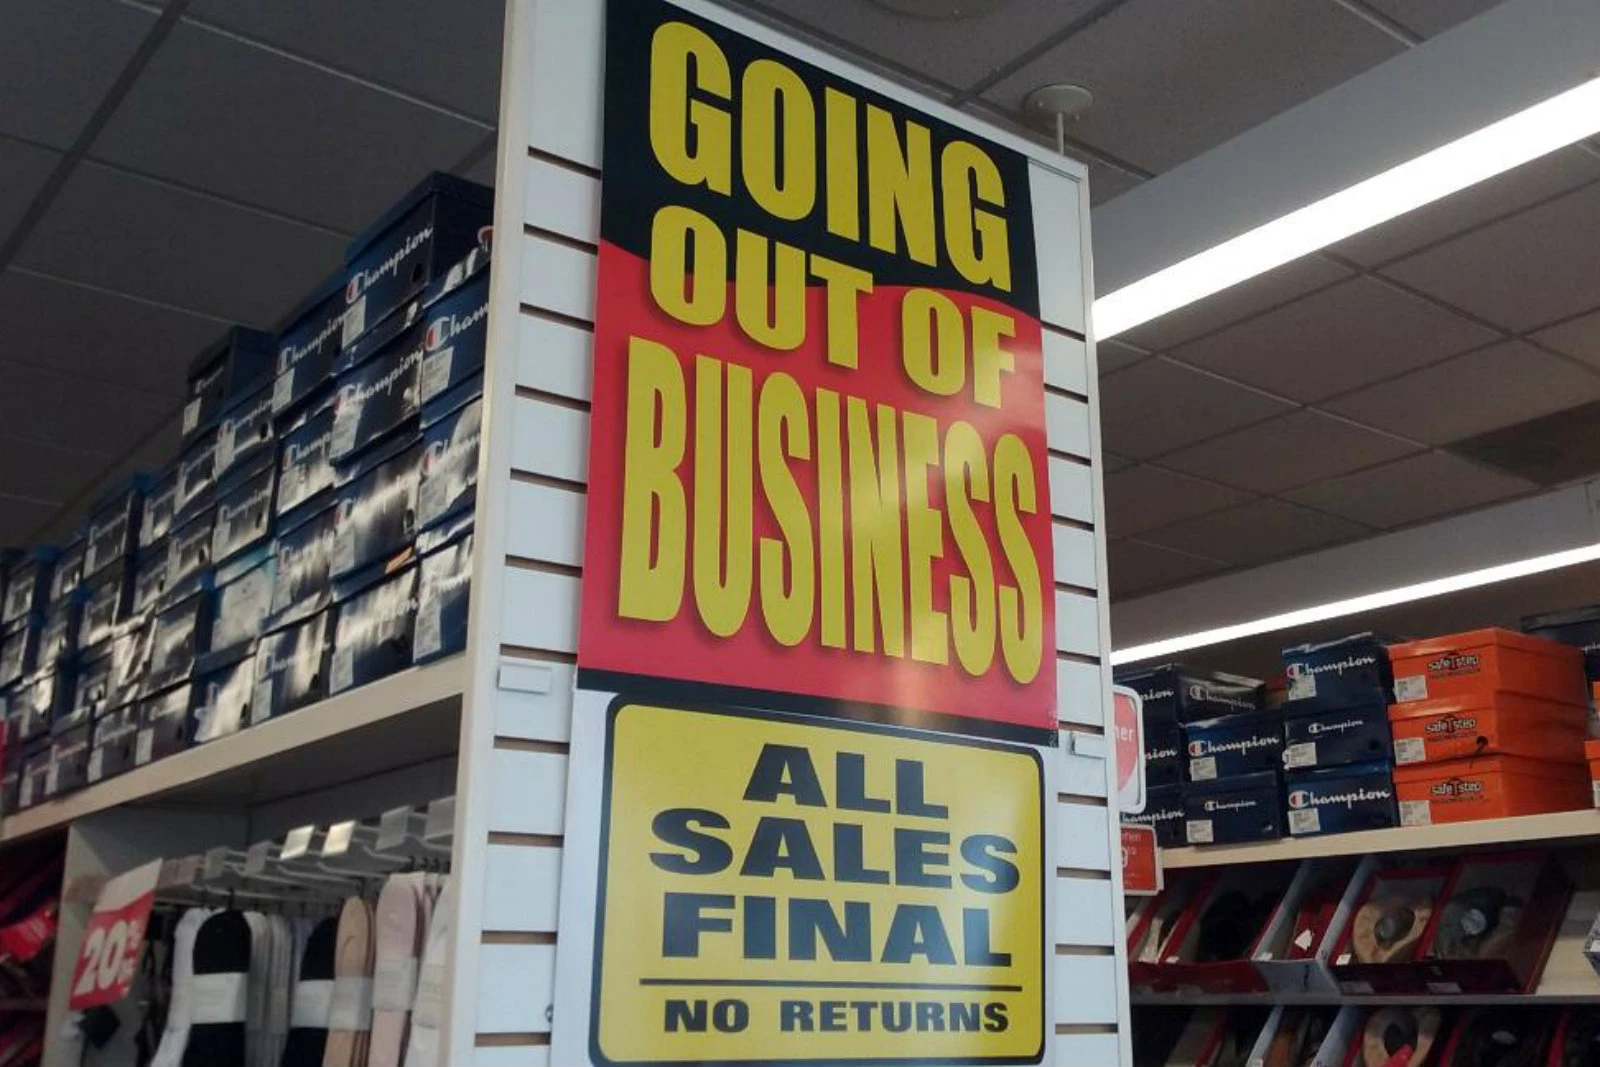 payless closes